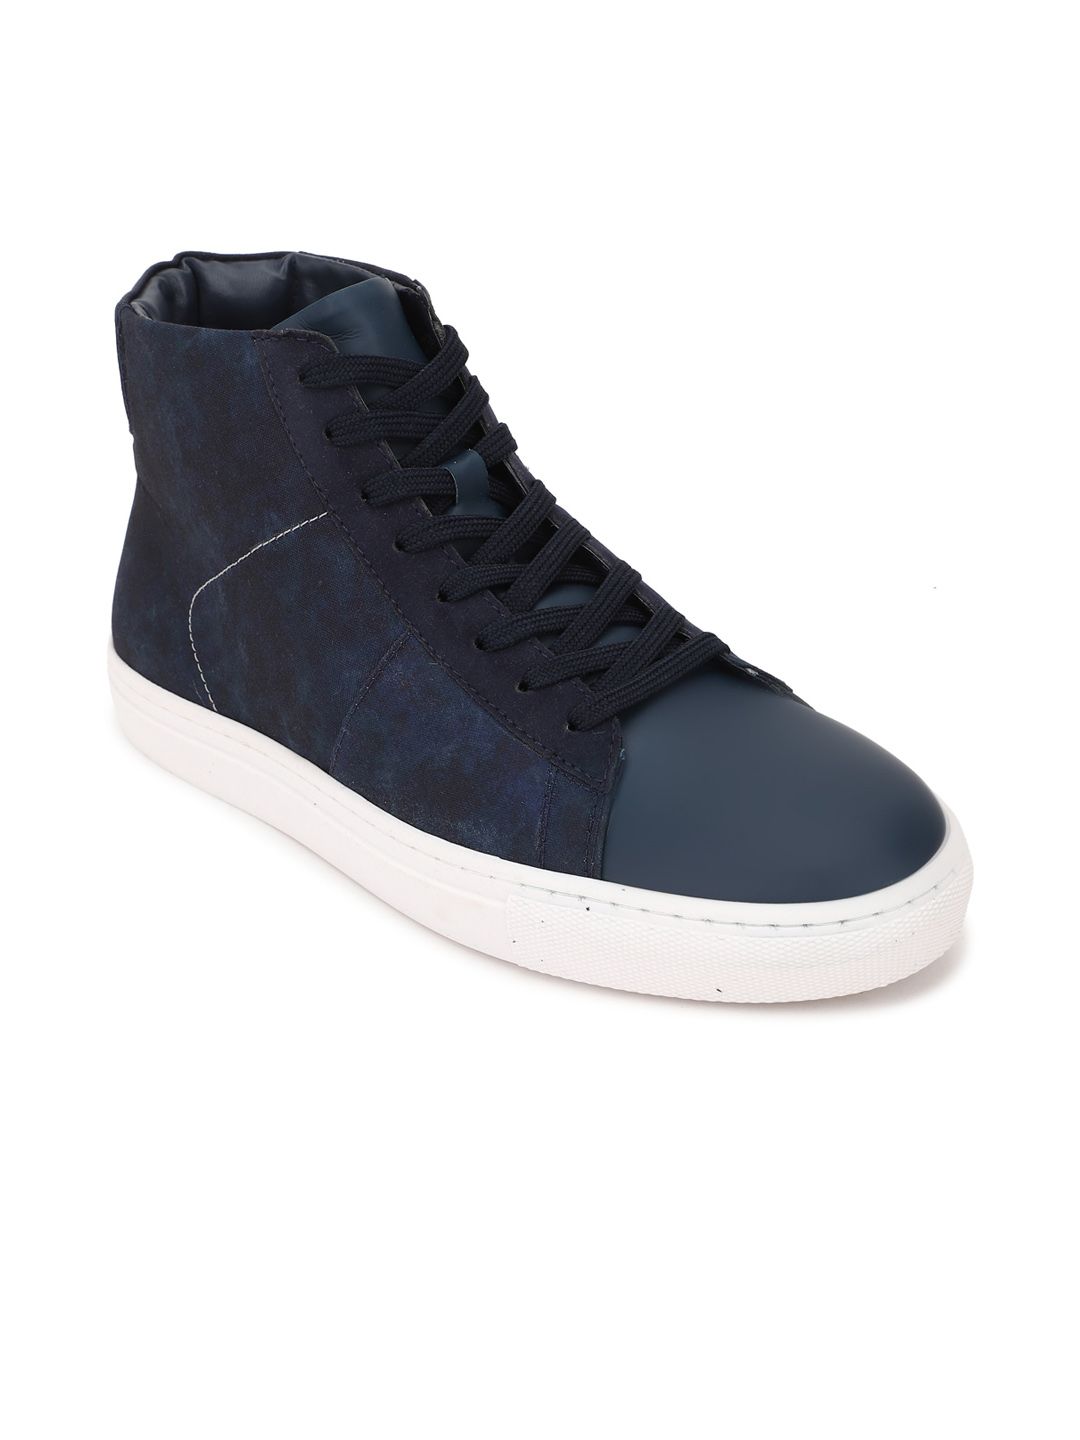 FOREVER 21 Women Navy Blue Textured Sneakers Price in India